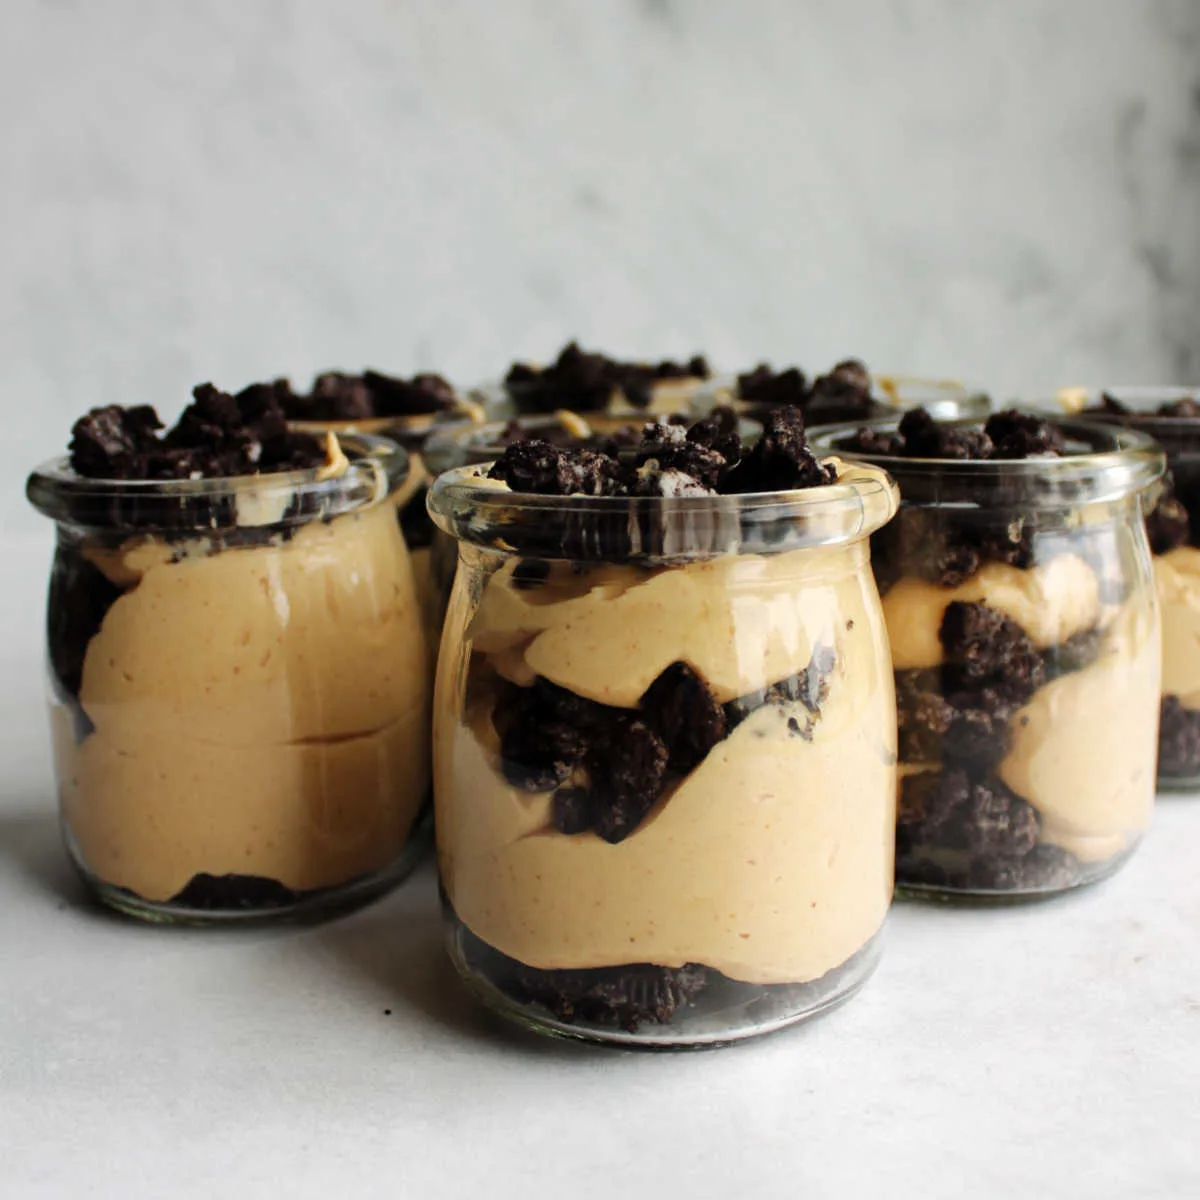 Small glass jars filled with layers of Oreo crumbs and fluffy peanut butter filling.